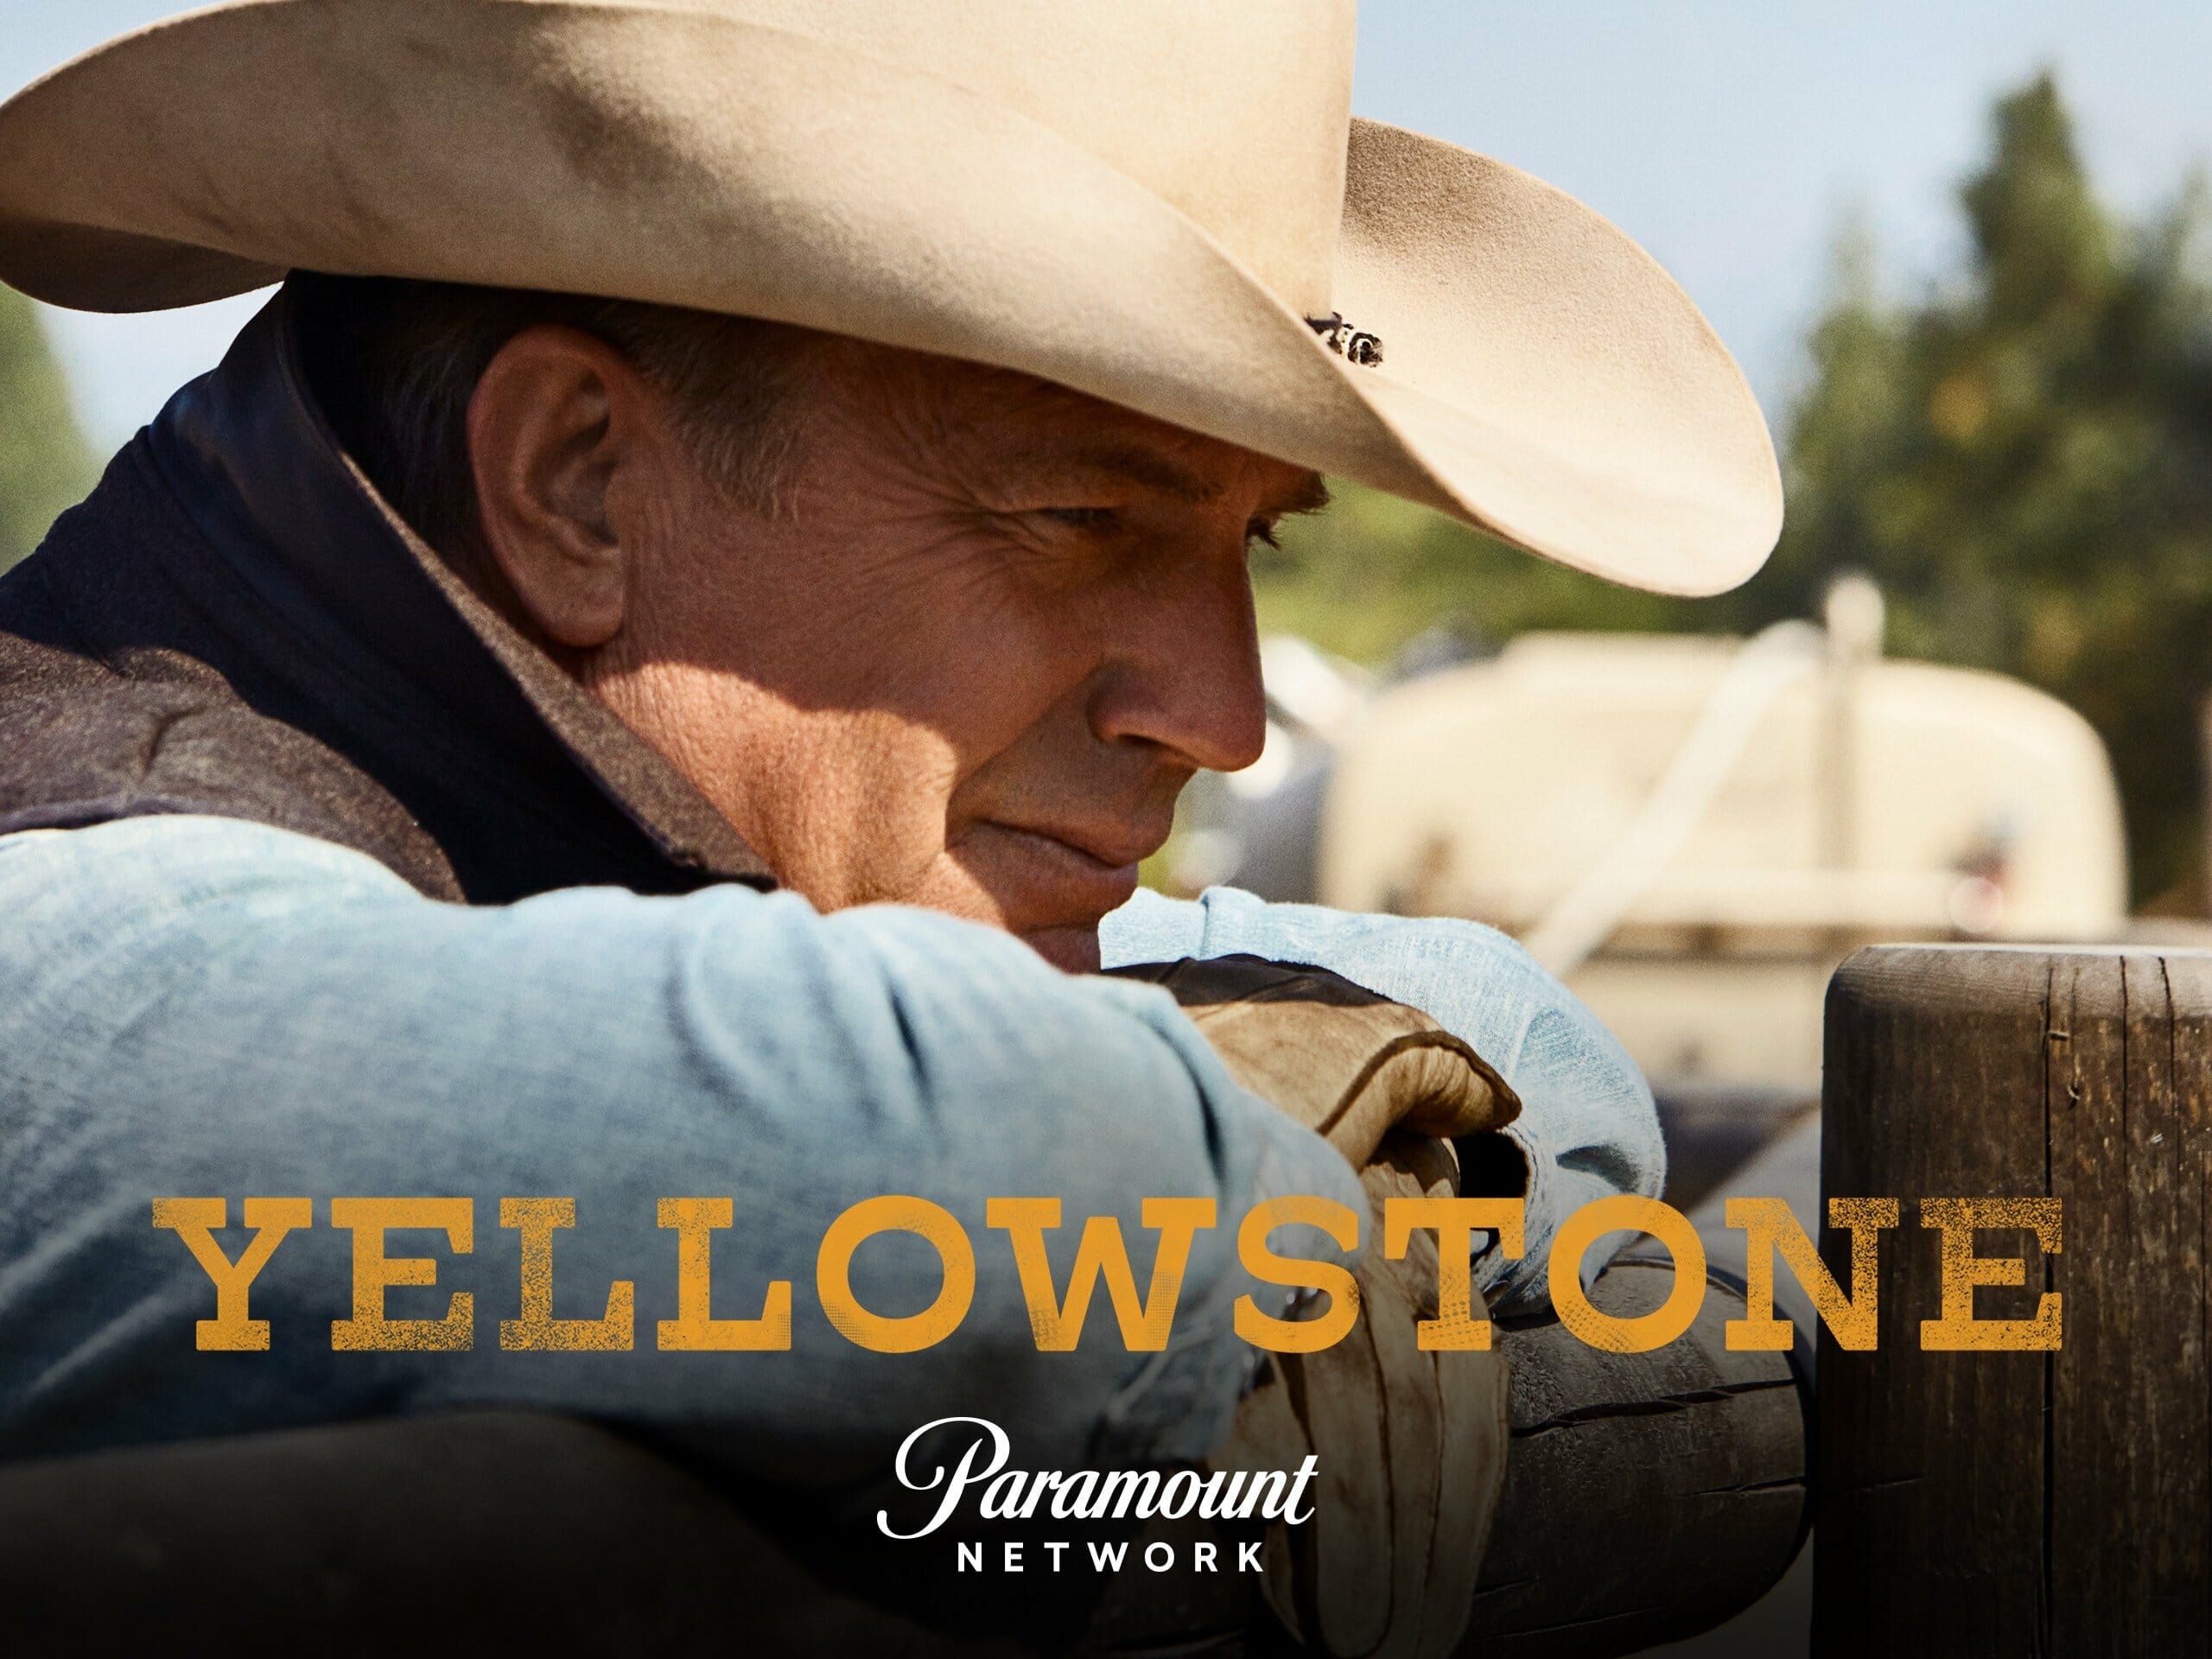 Can I watch Yellowstone on Amazon Prime?